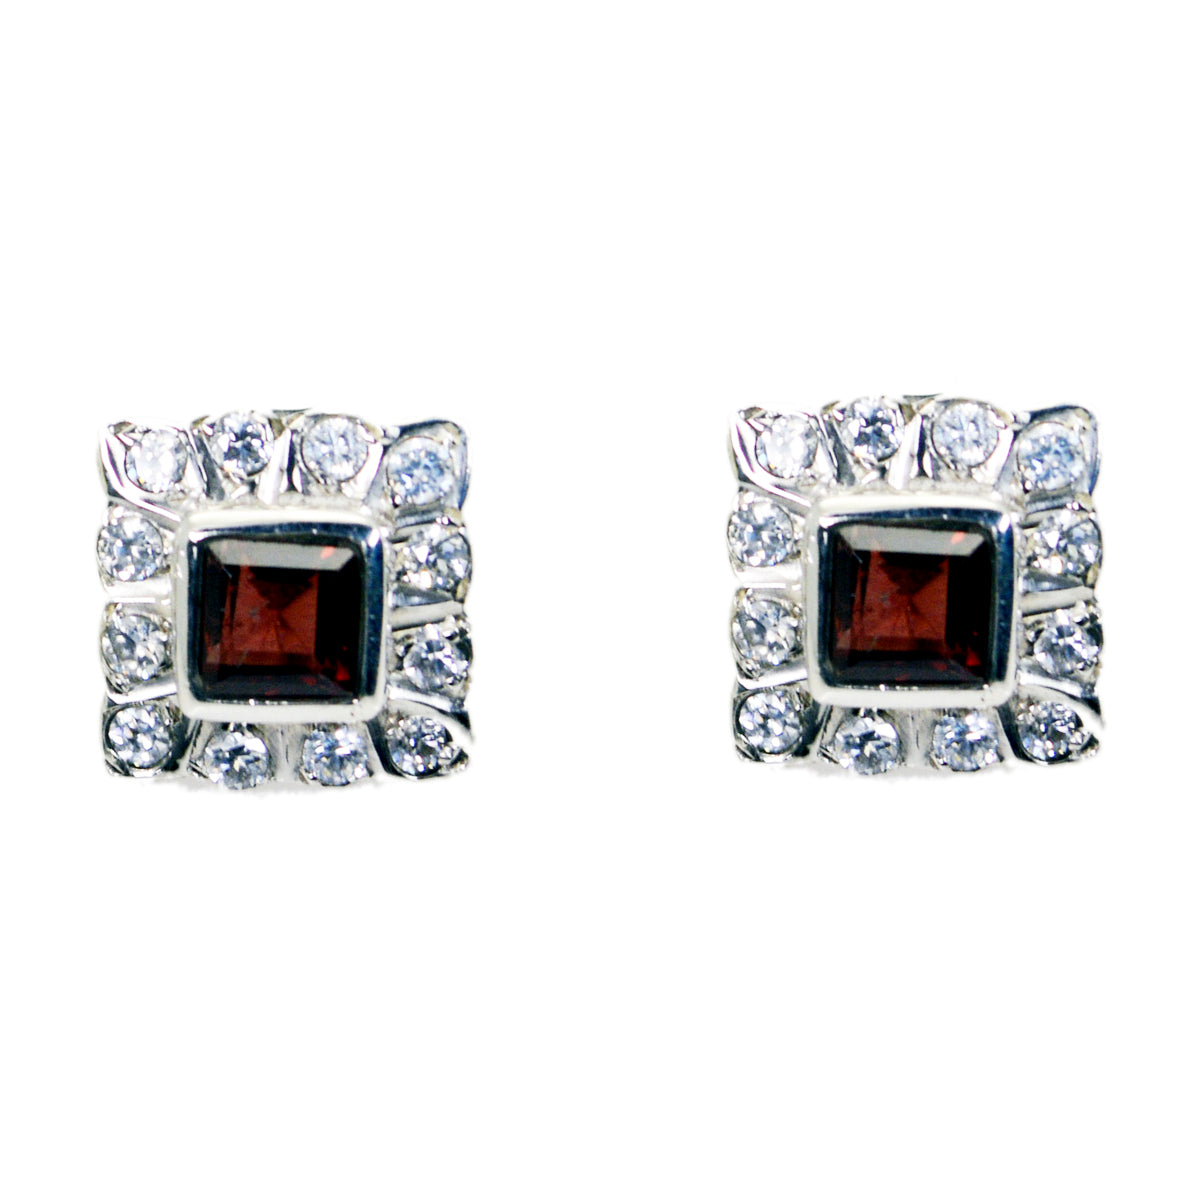 Riyo Nice Gemstone square Faceted Red Garnet Silver Earrings gift for engagement